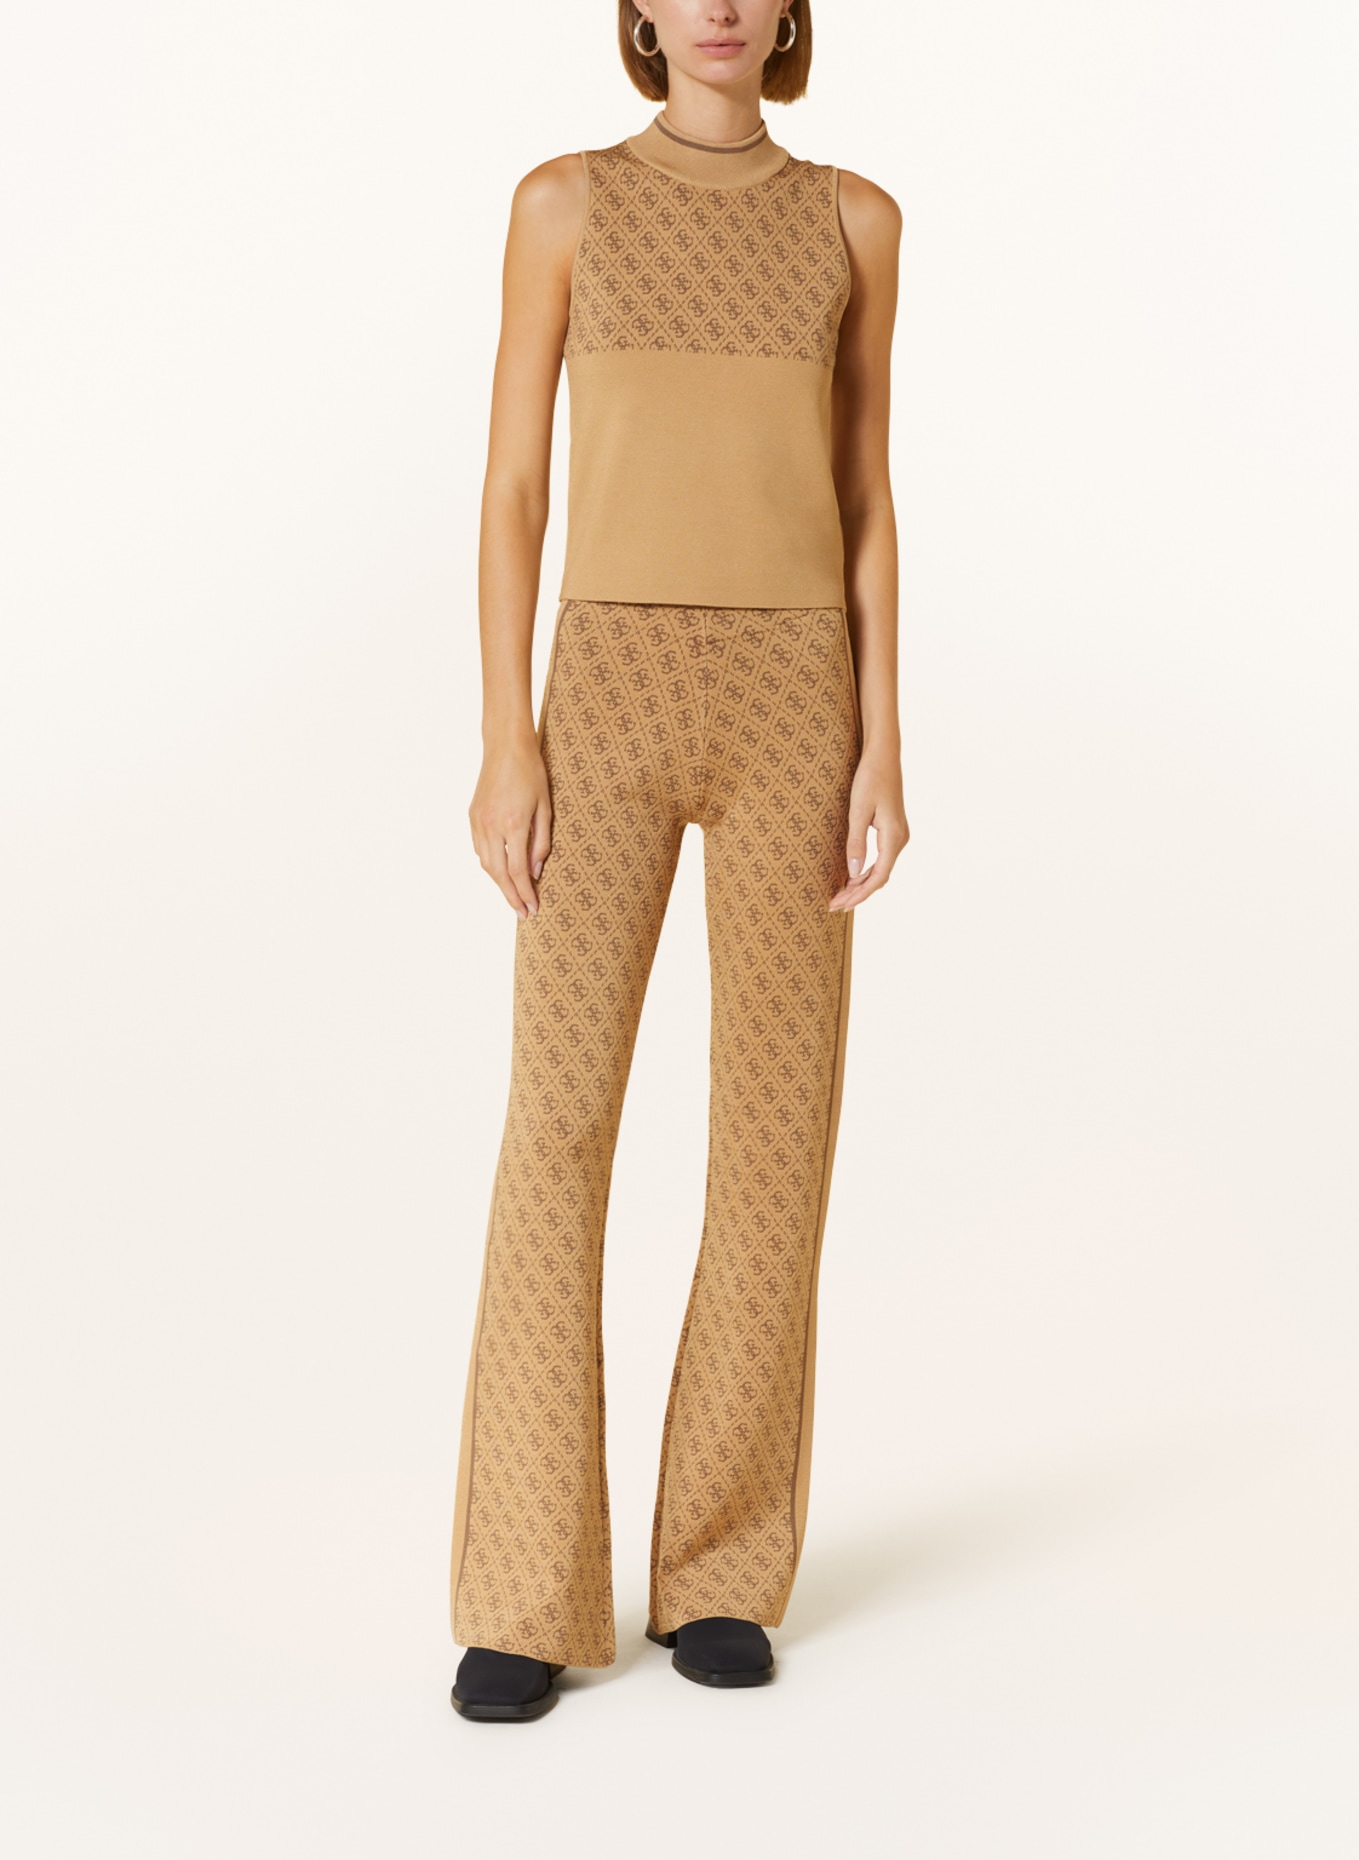 GUESS Knit top, Color: CAMEL/ TAUPE (Image 2)